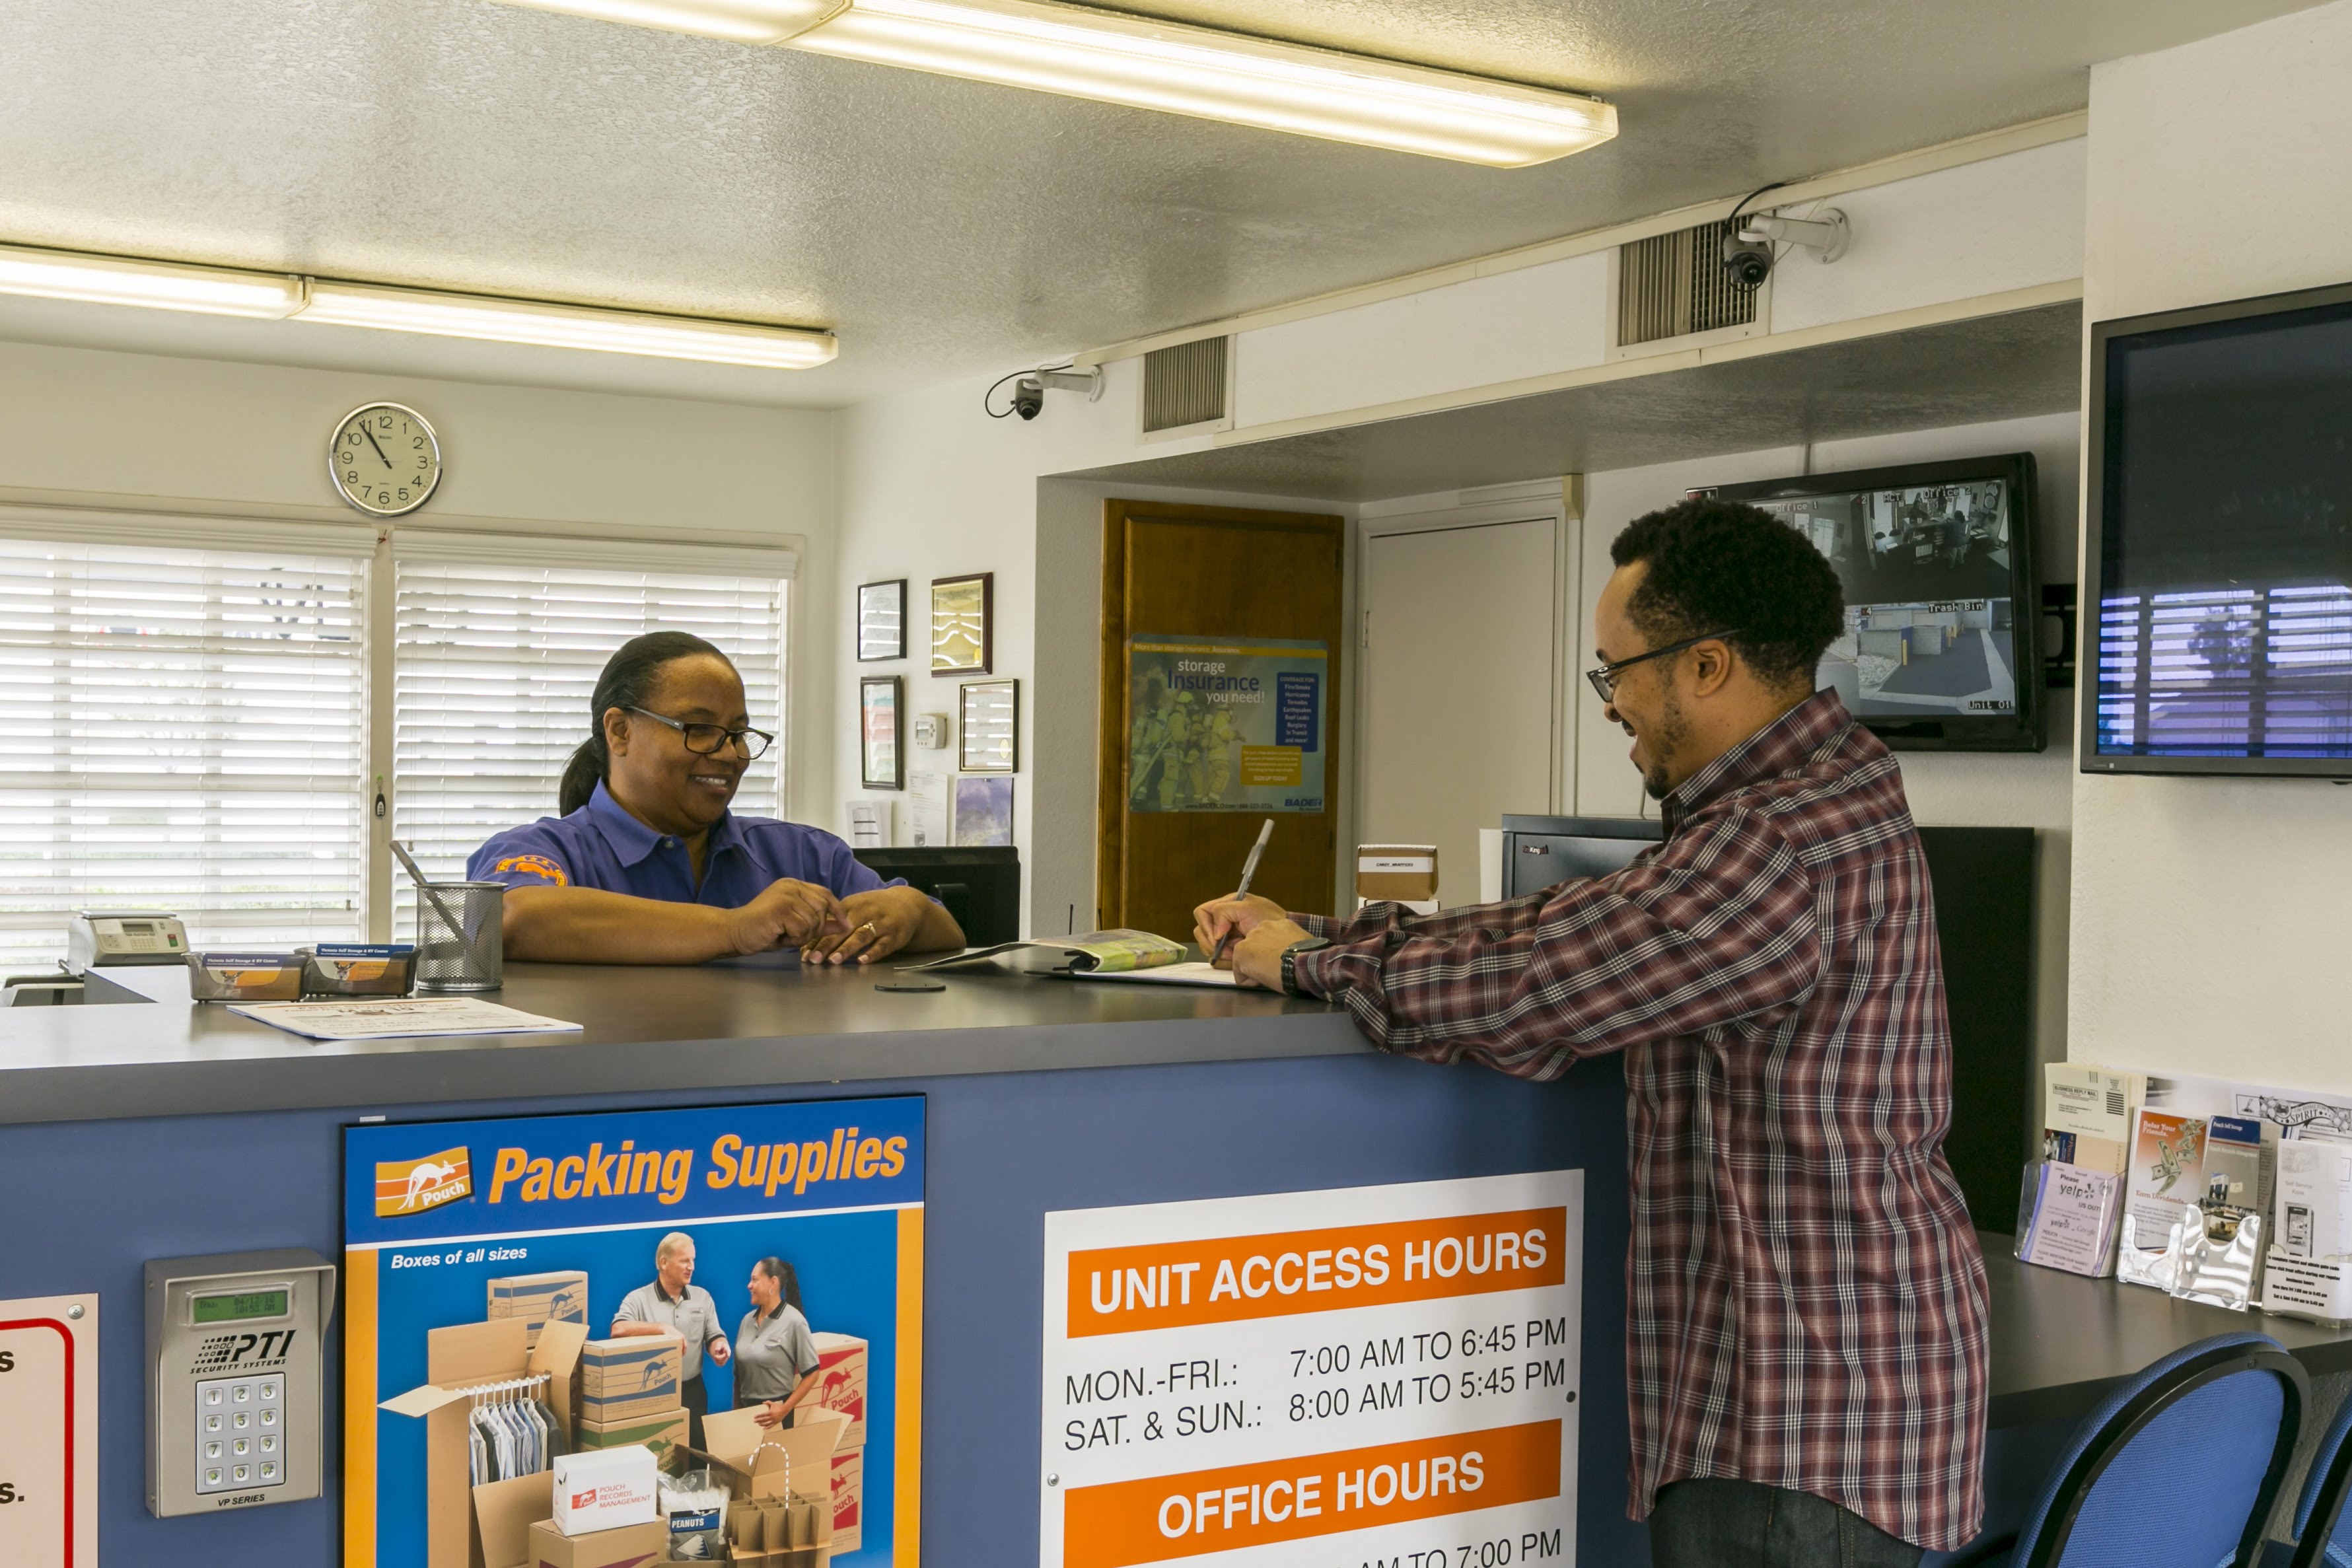 Self Storage counselor assisting a tenant